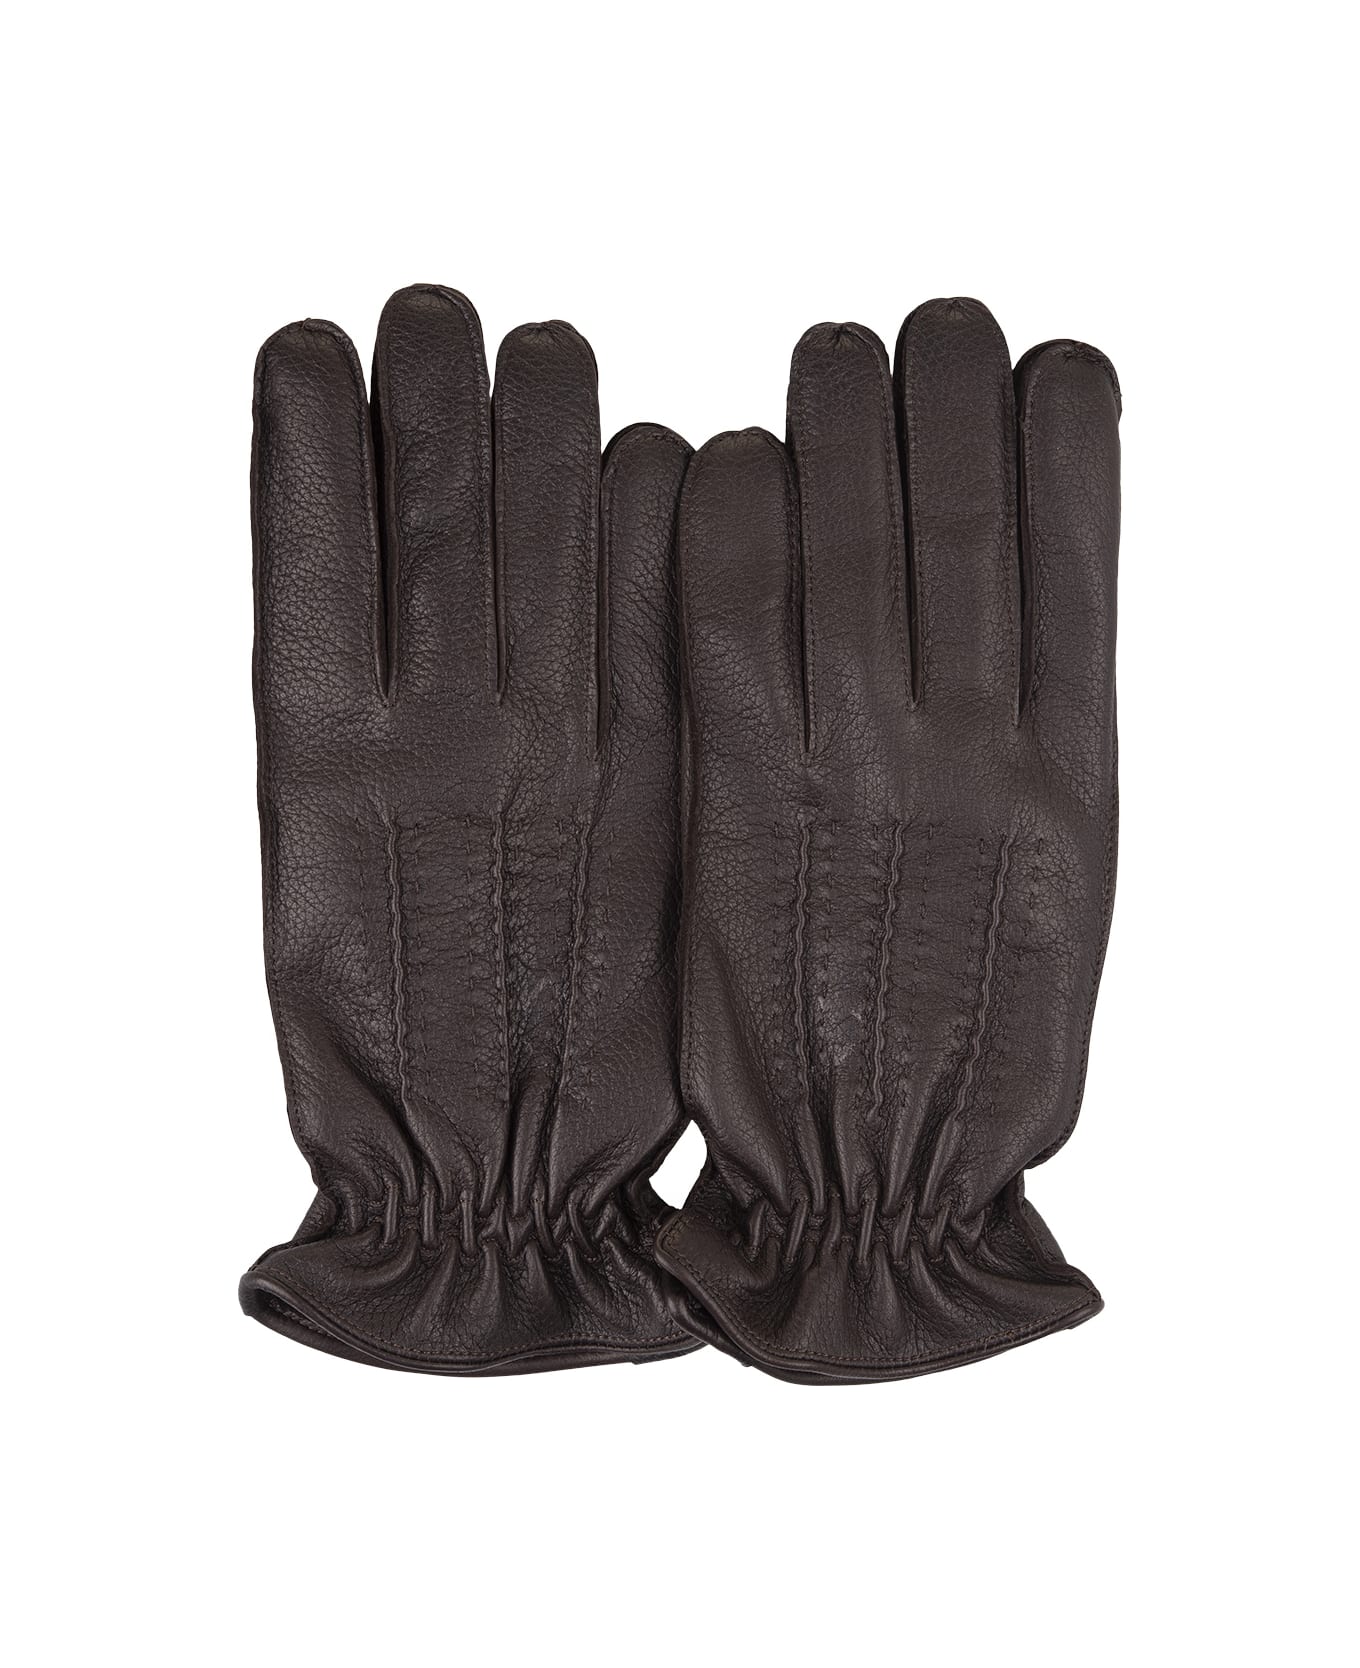 Orciani Drummed Gloves In Dark Brown Leather - Brown